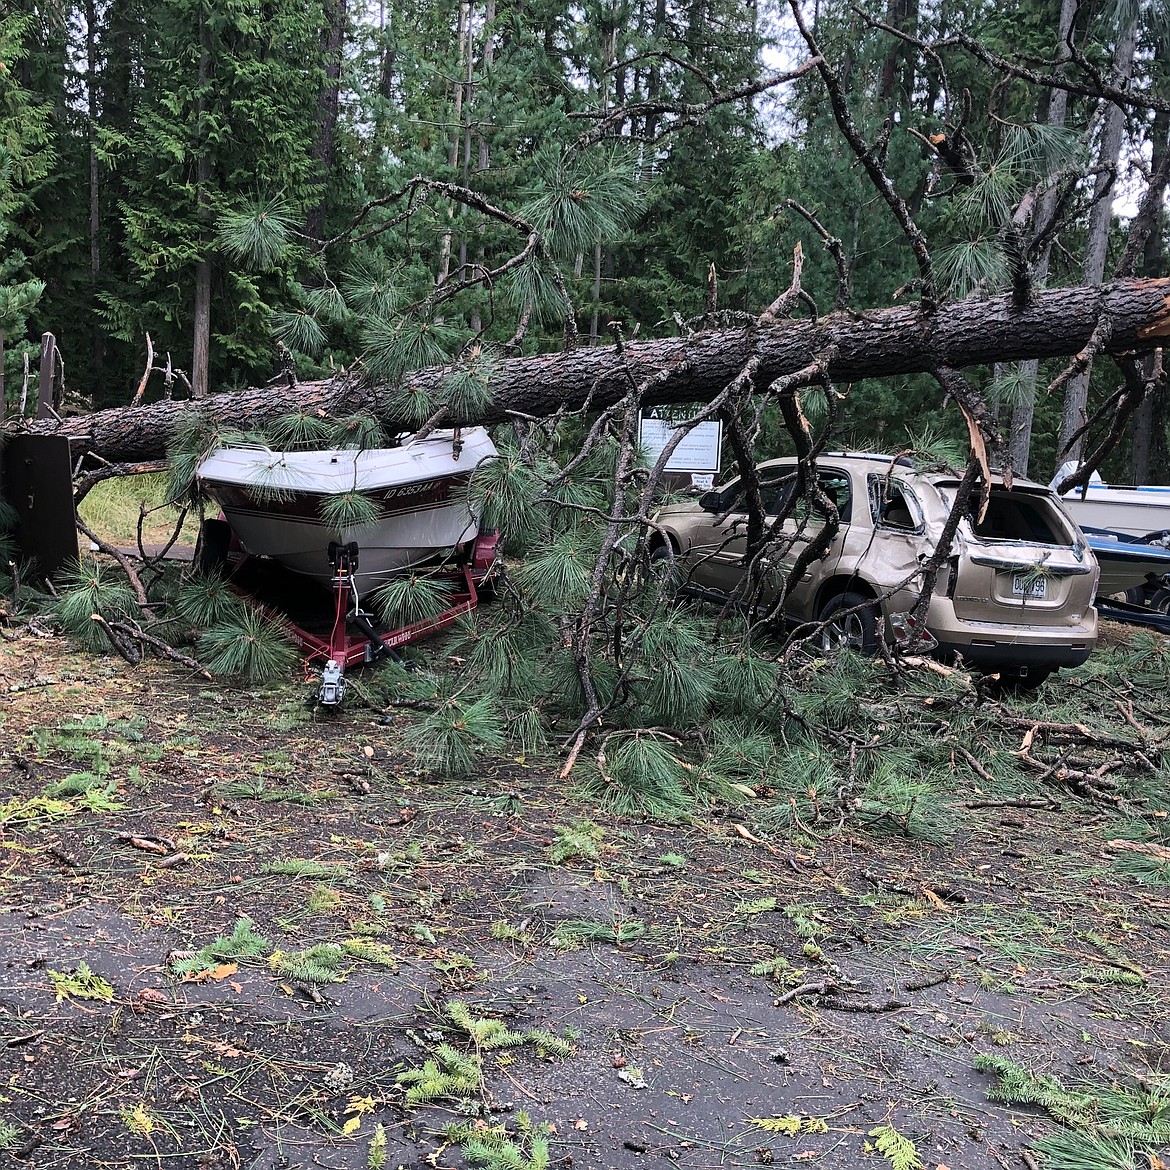 In this September 2020 photo taken by Hillary Main, a boat at Sam Owen Campground lays under a tree knocked down in a massive windstorm. Thousands of trees in the area that were damaged by the storm are now being removed by crews, U.S. Forest Service announced Wednesday.